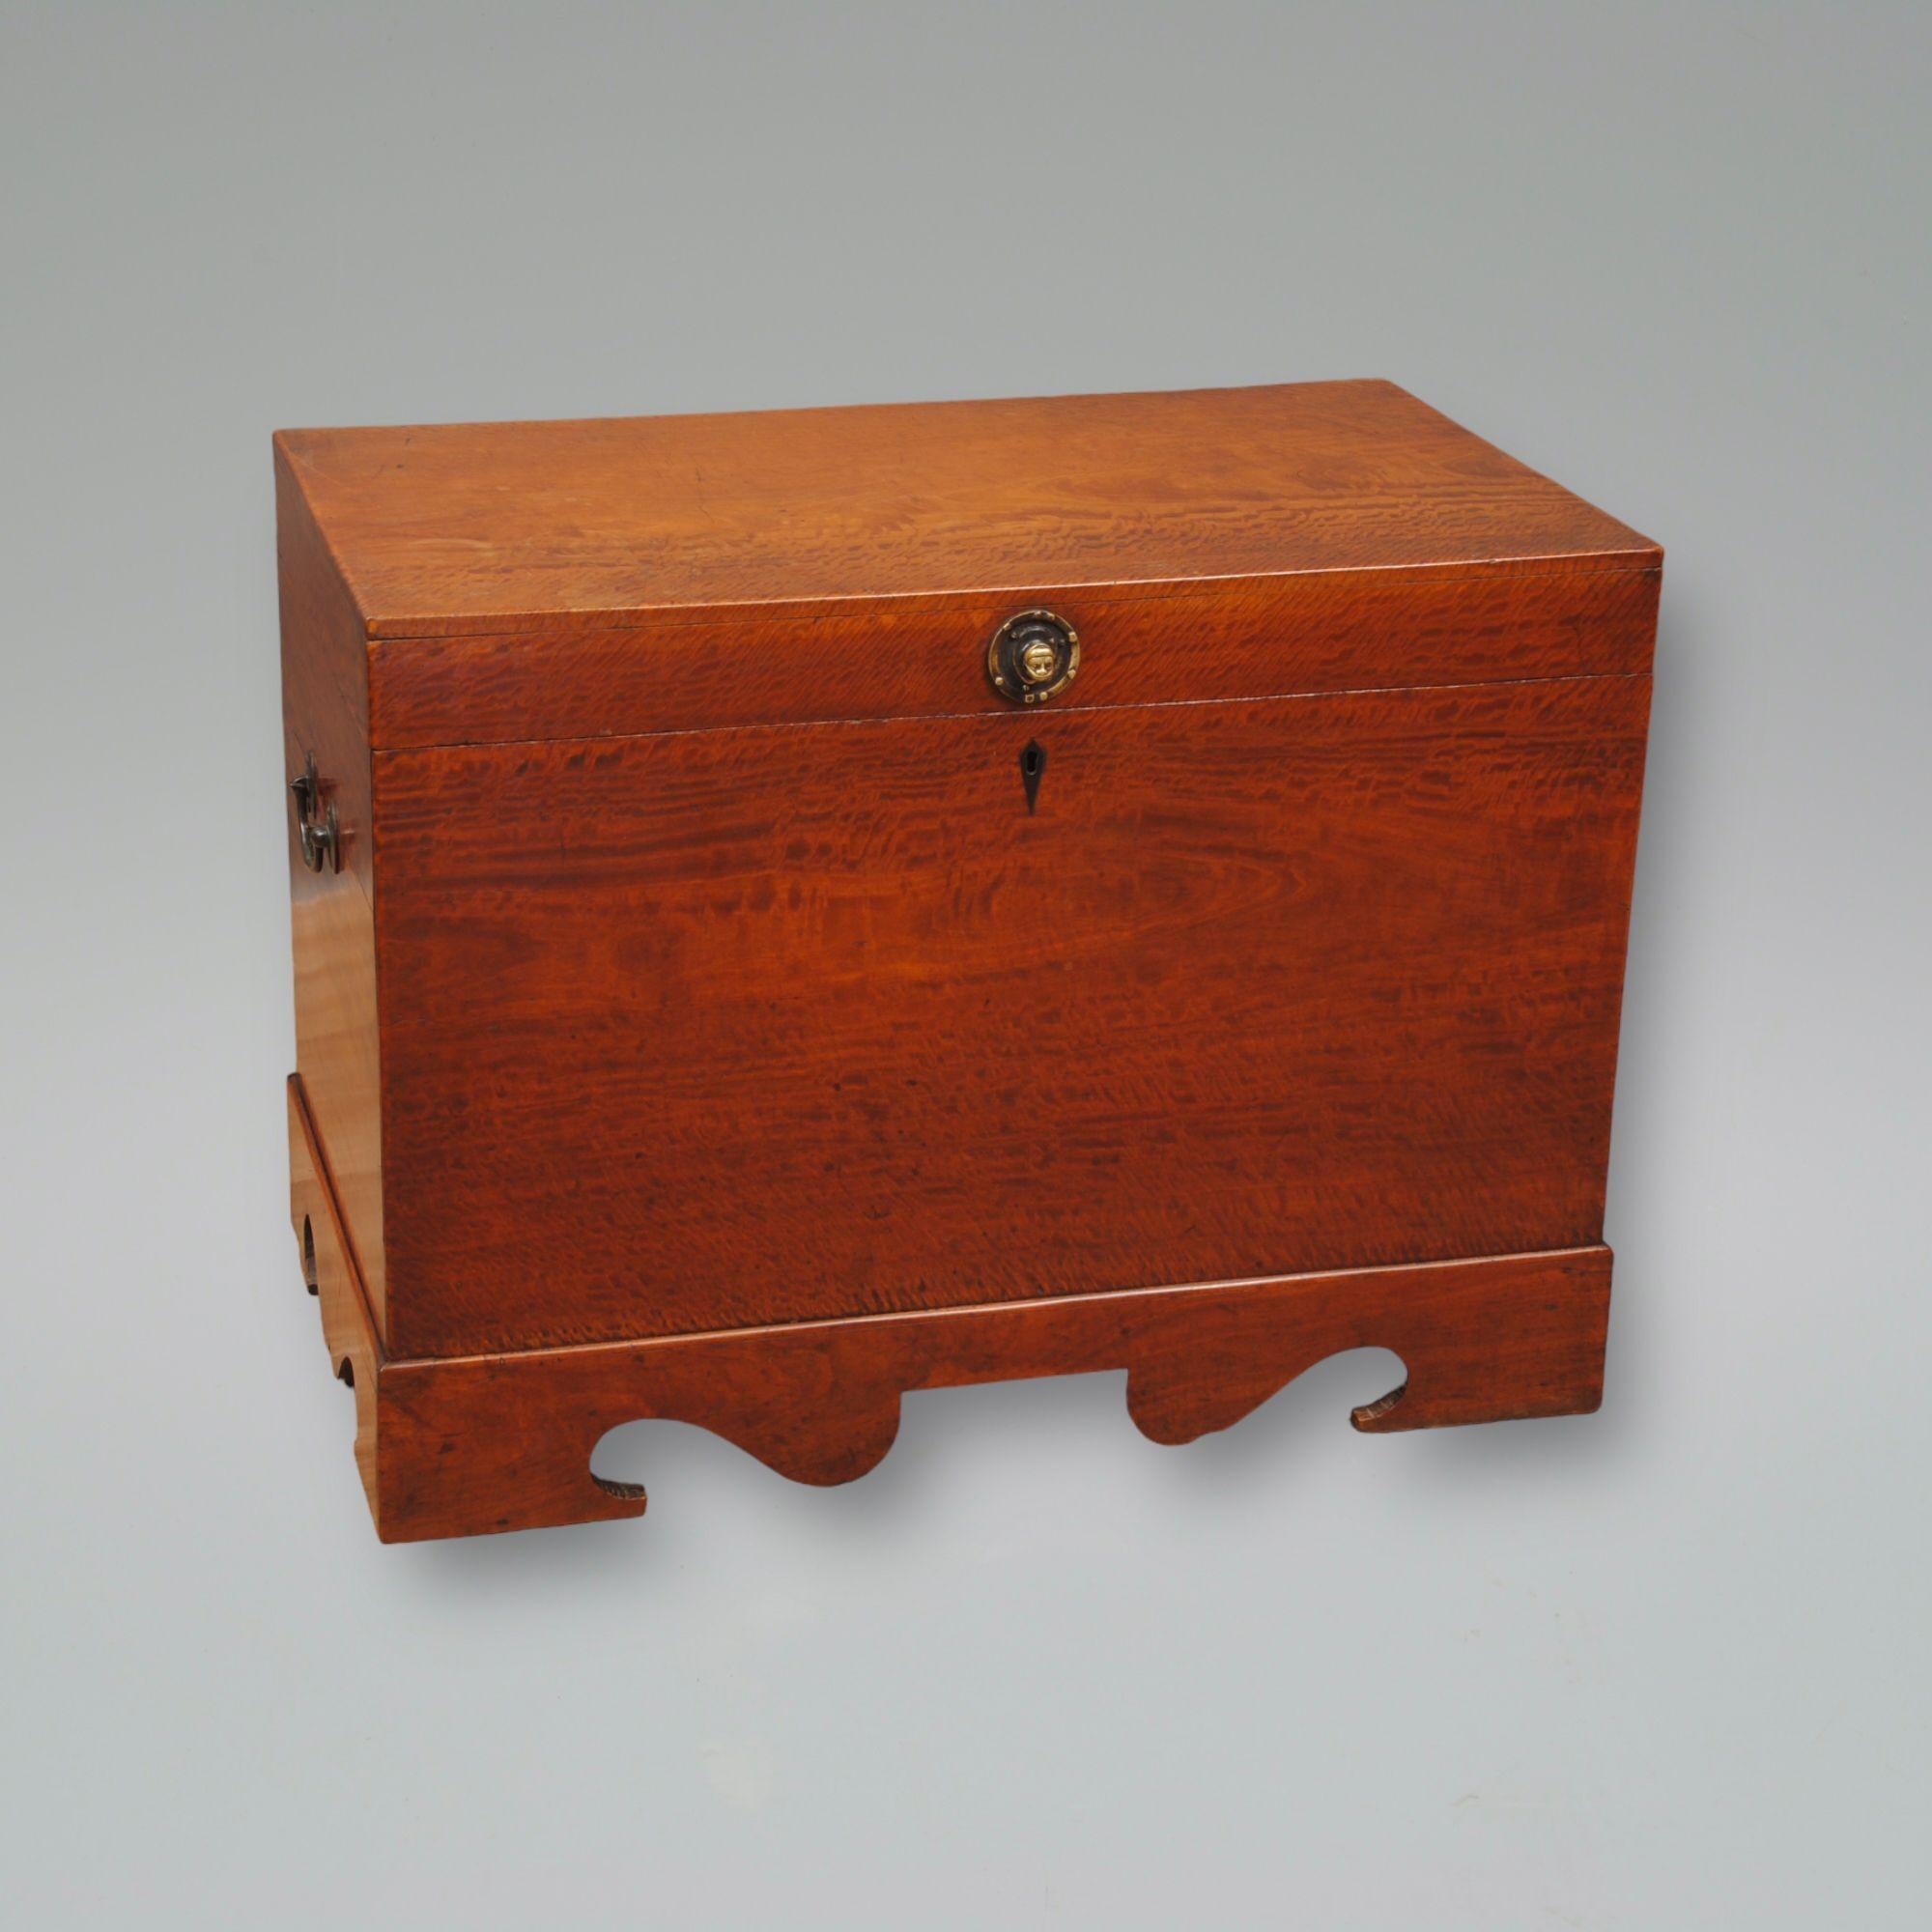 A rare early 19th century solid satinwood anglo indian trunk with brass carrying handles. Superb colour and patination 